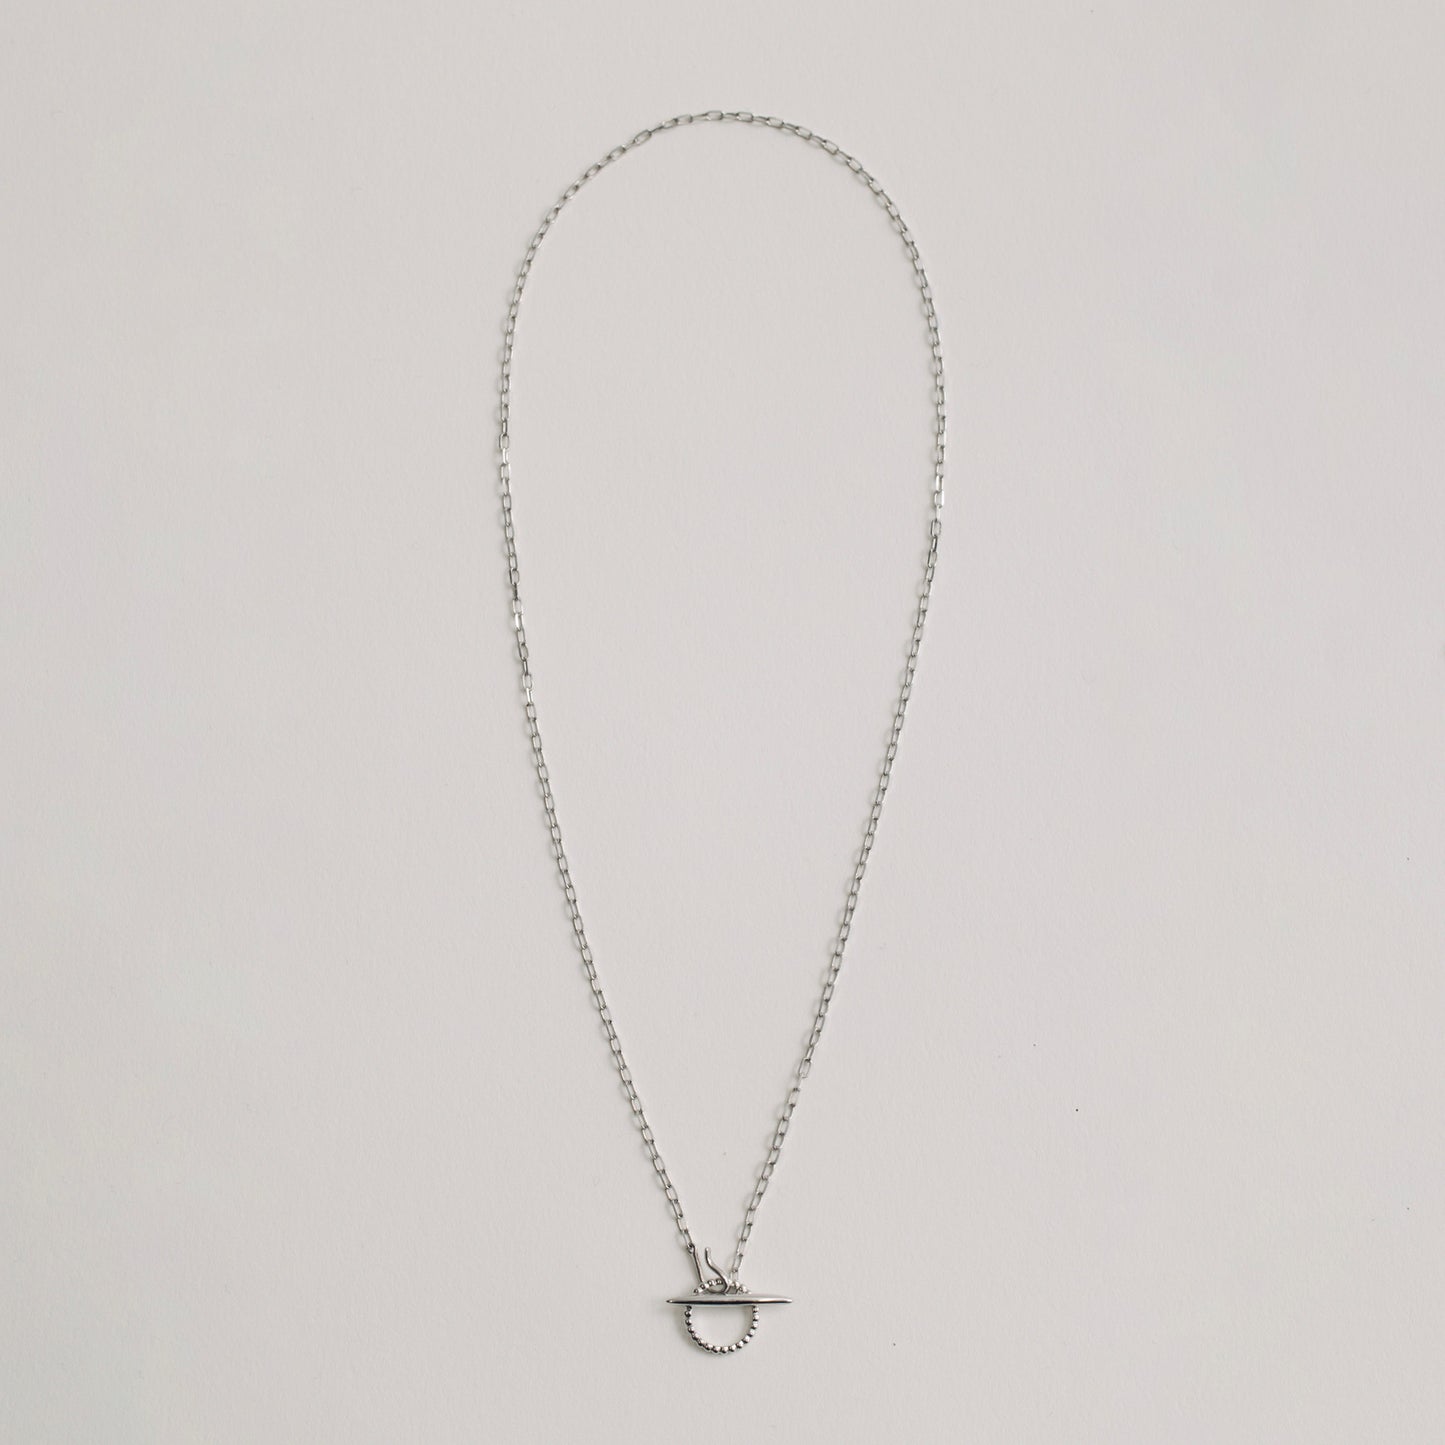 loquaxマタニティジュエリーセット シルバー（Babyring Silver × Necklace Silver）